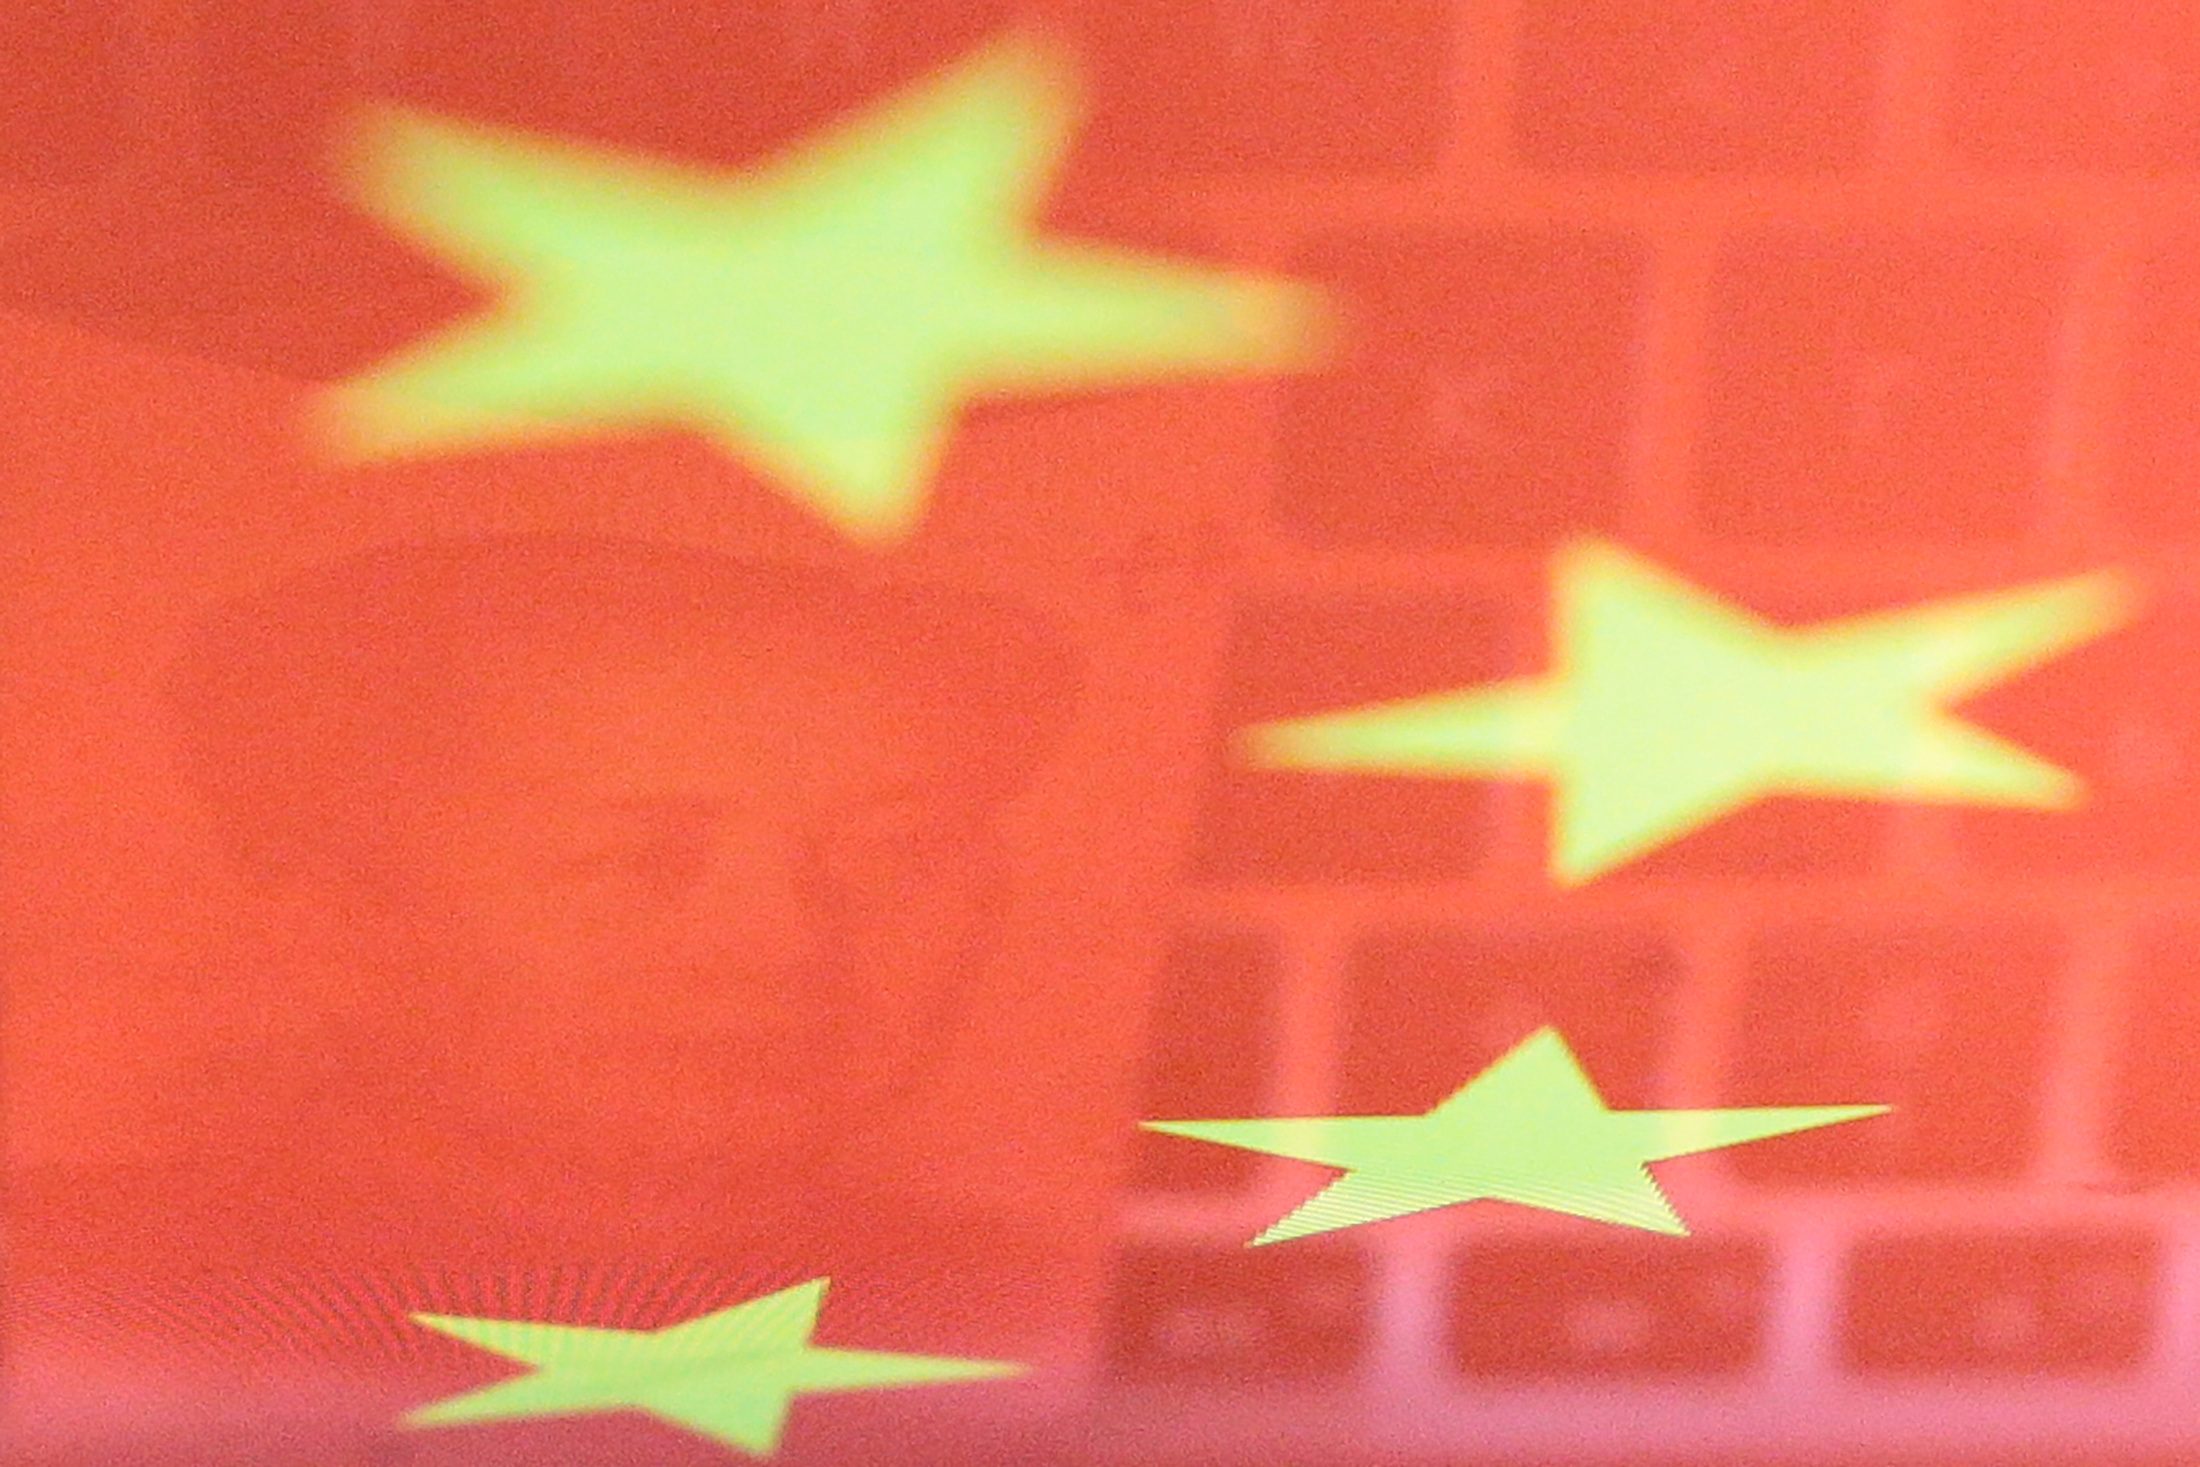 China's new disclosure rules may dampen companies' listing prospects in Europe